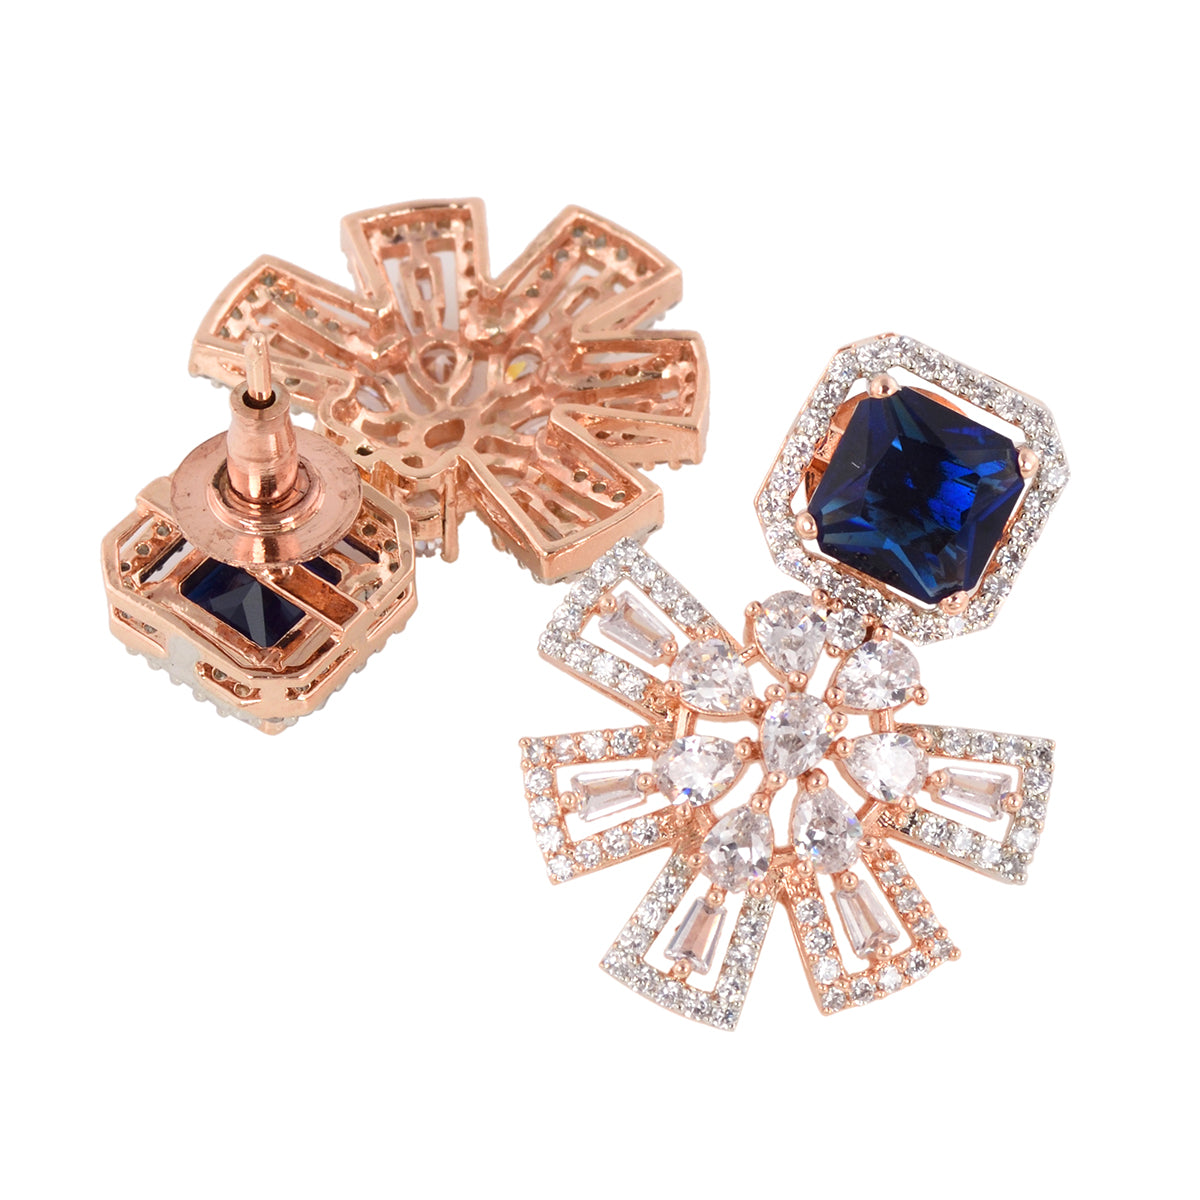 Exquisite Sapphire Floral Design Blue Earrings Rose Gold Plated American Diamond Studded for Women and Girls - Saraf RS Jewellery